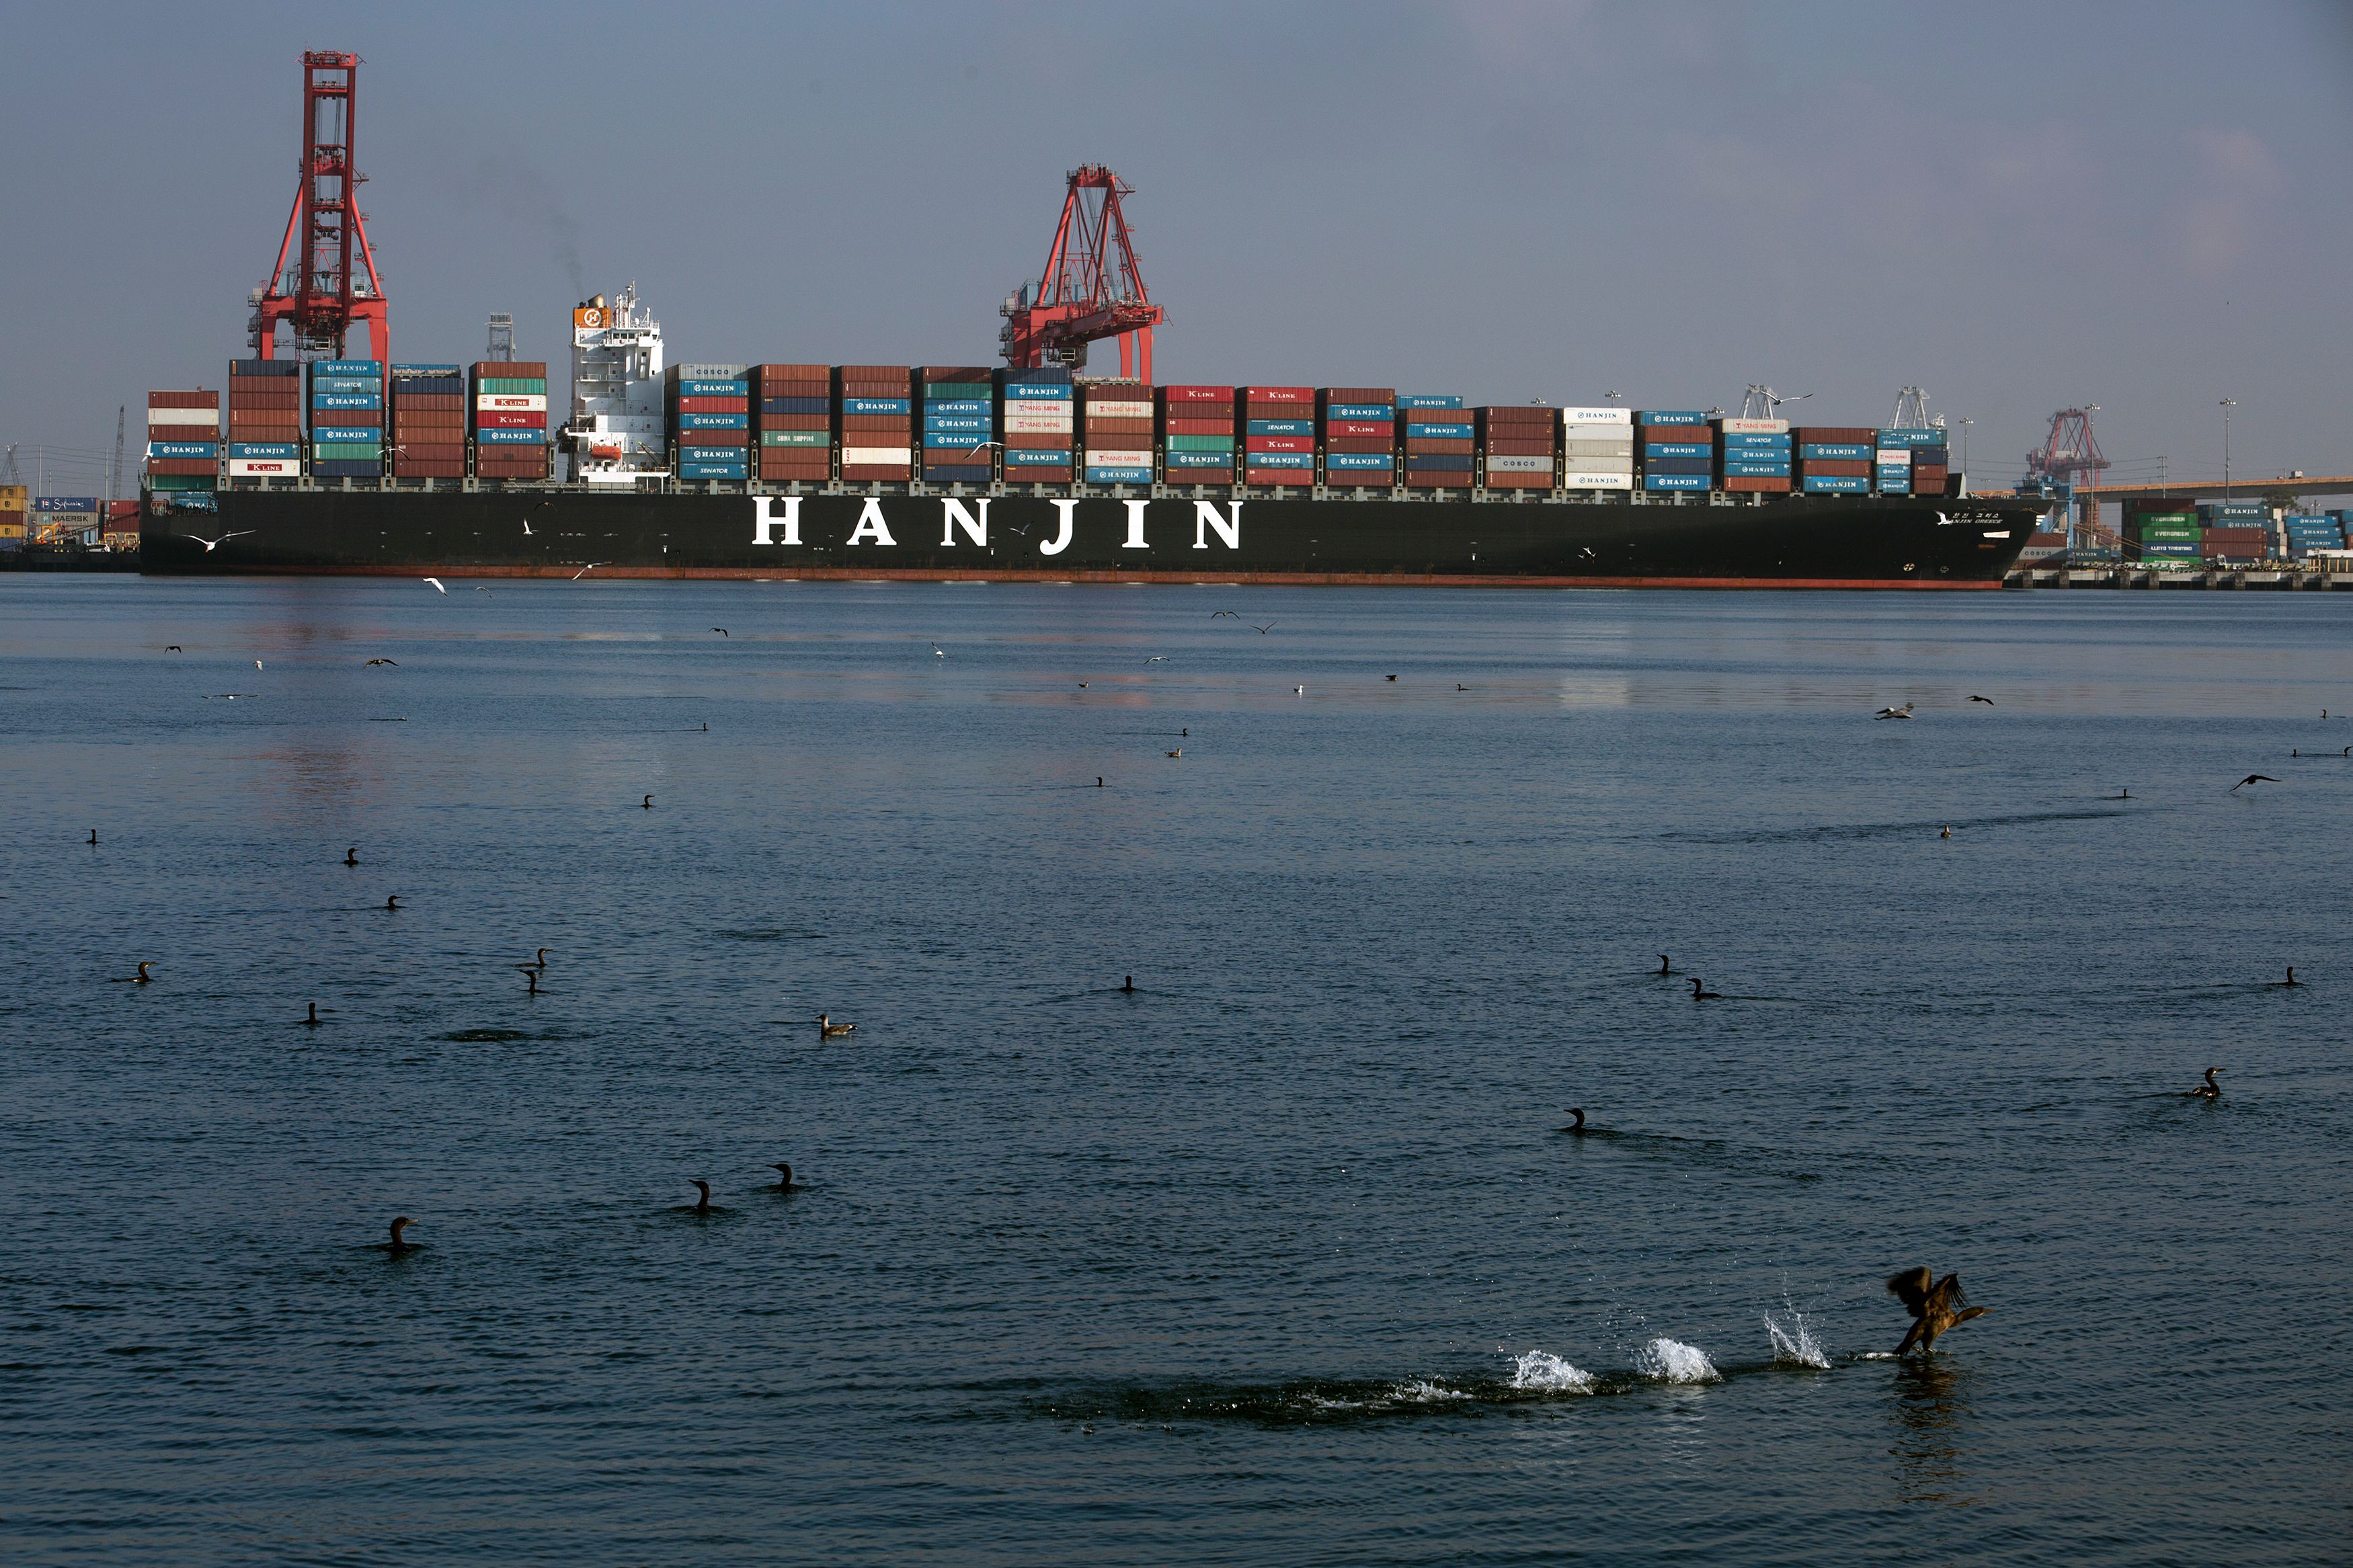 The Hanjin Greece container ship is docked for unloading at the Port of Long Beach, Calif., Sept. 10, 2016, after being stranded at sea for more than a week for fear that it could be seized by creditors if it came to shore. (David McNew—AFP/Getty Images)